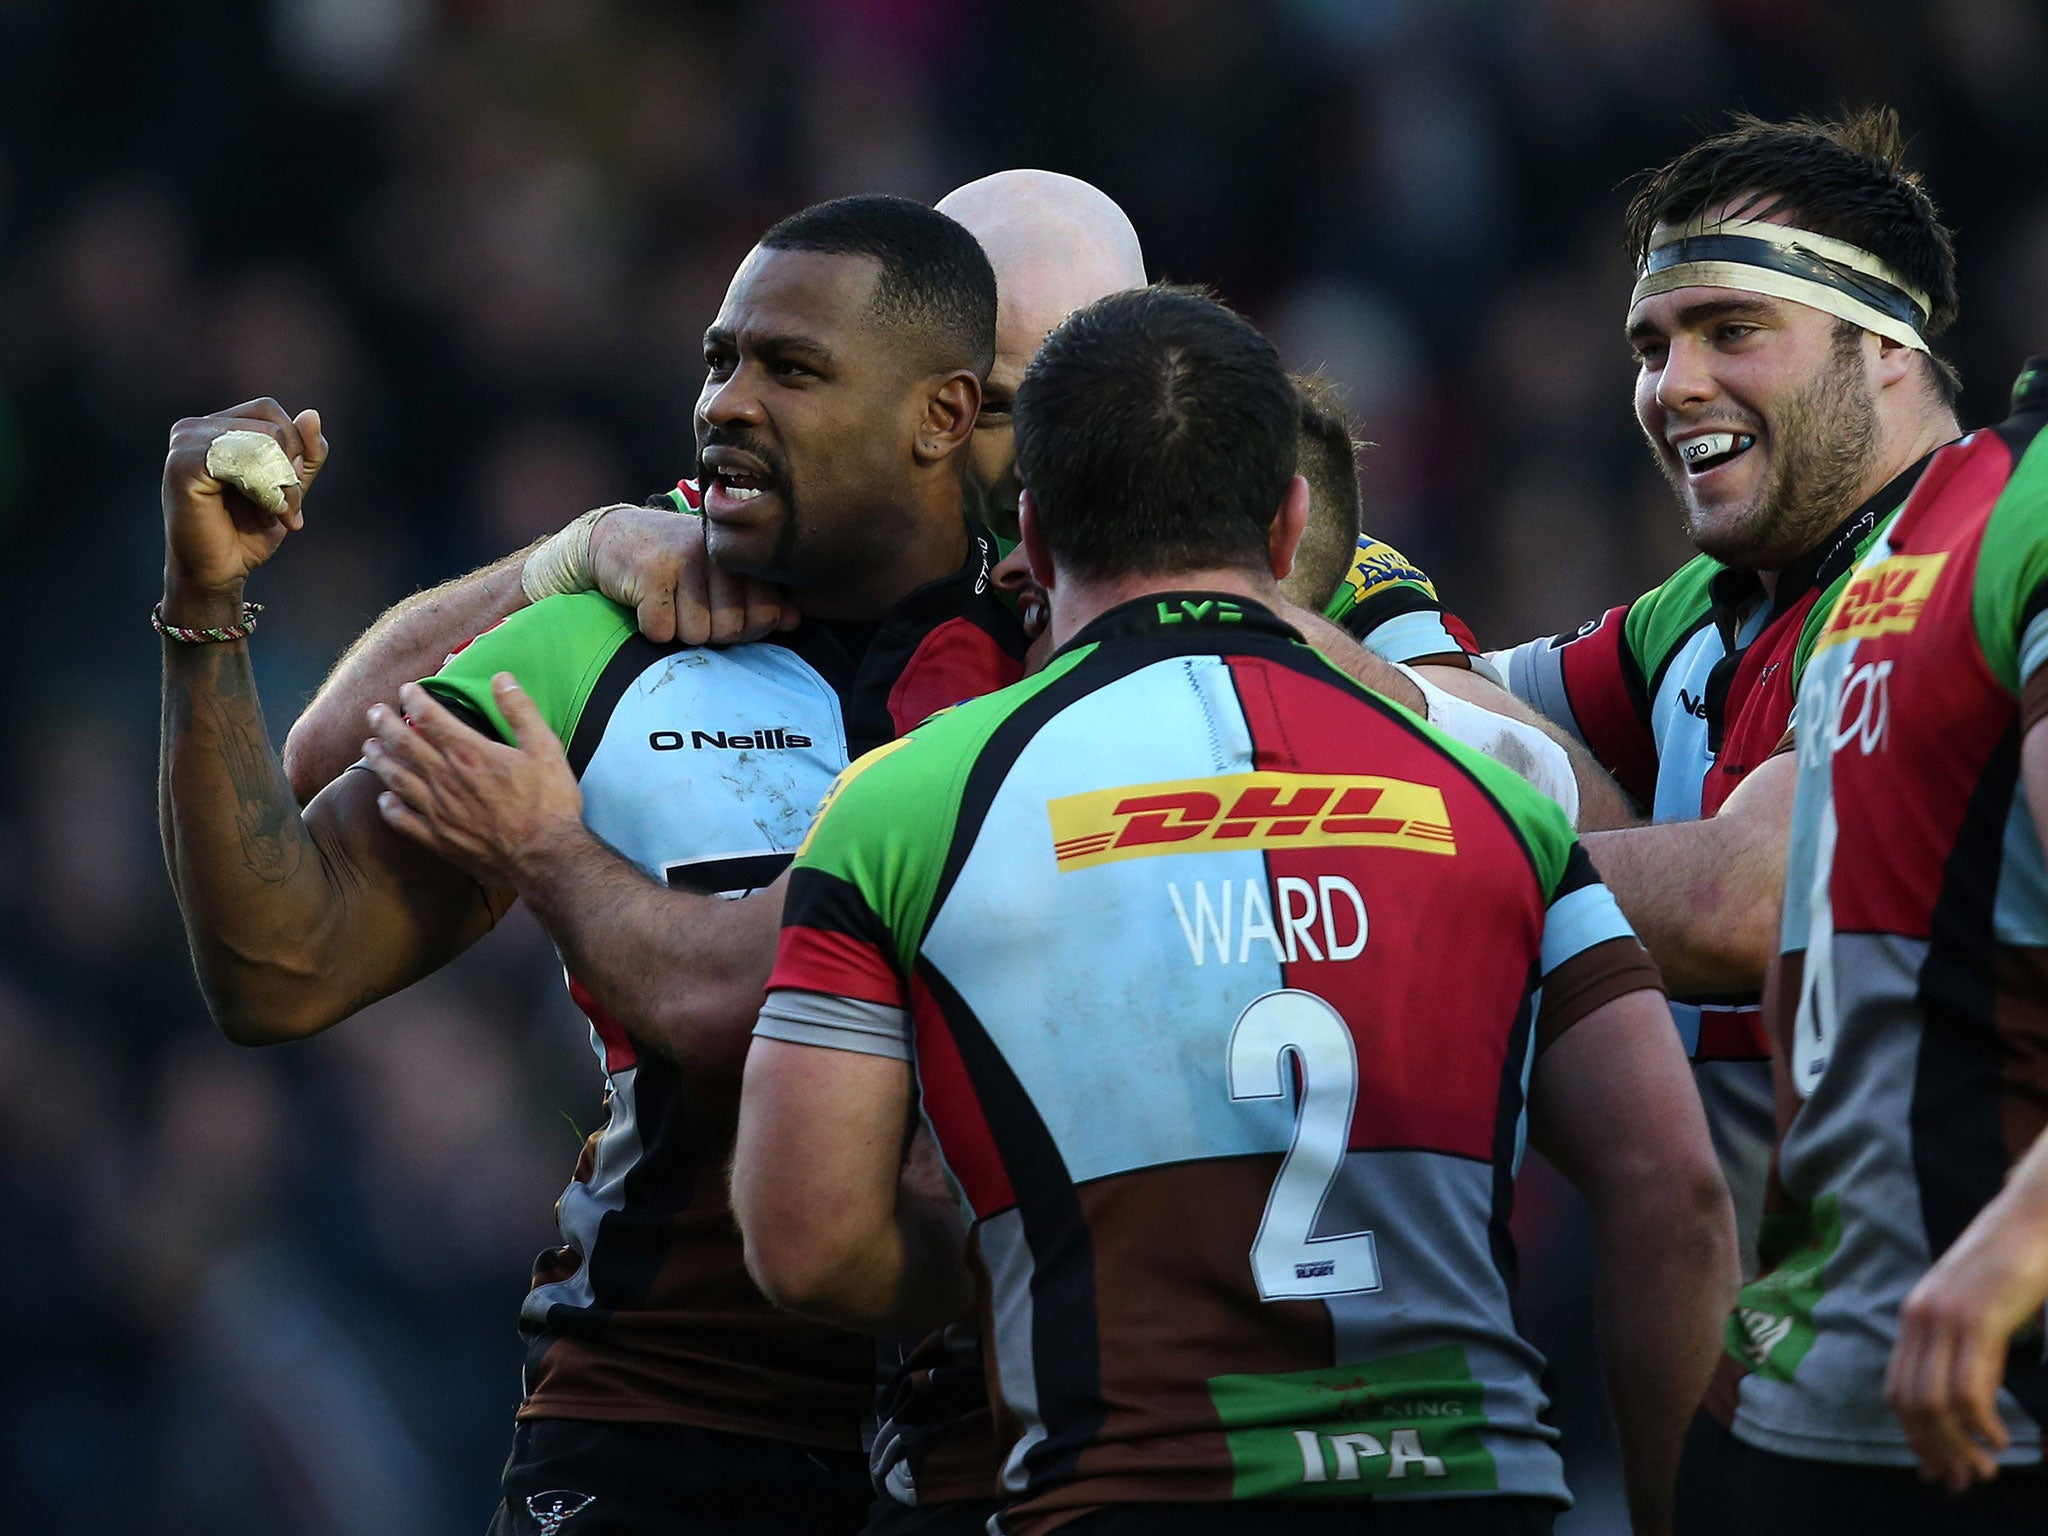 Odds are still heavily against the Harlequins after consecutive defeats in Octobe